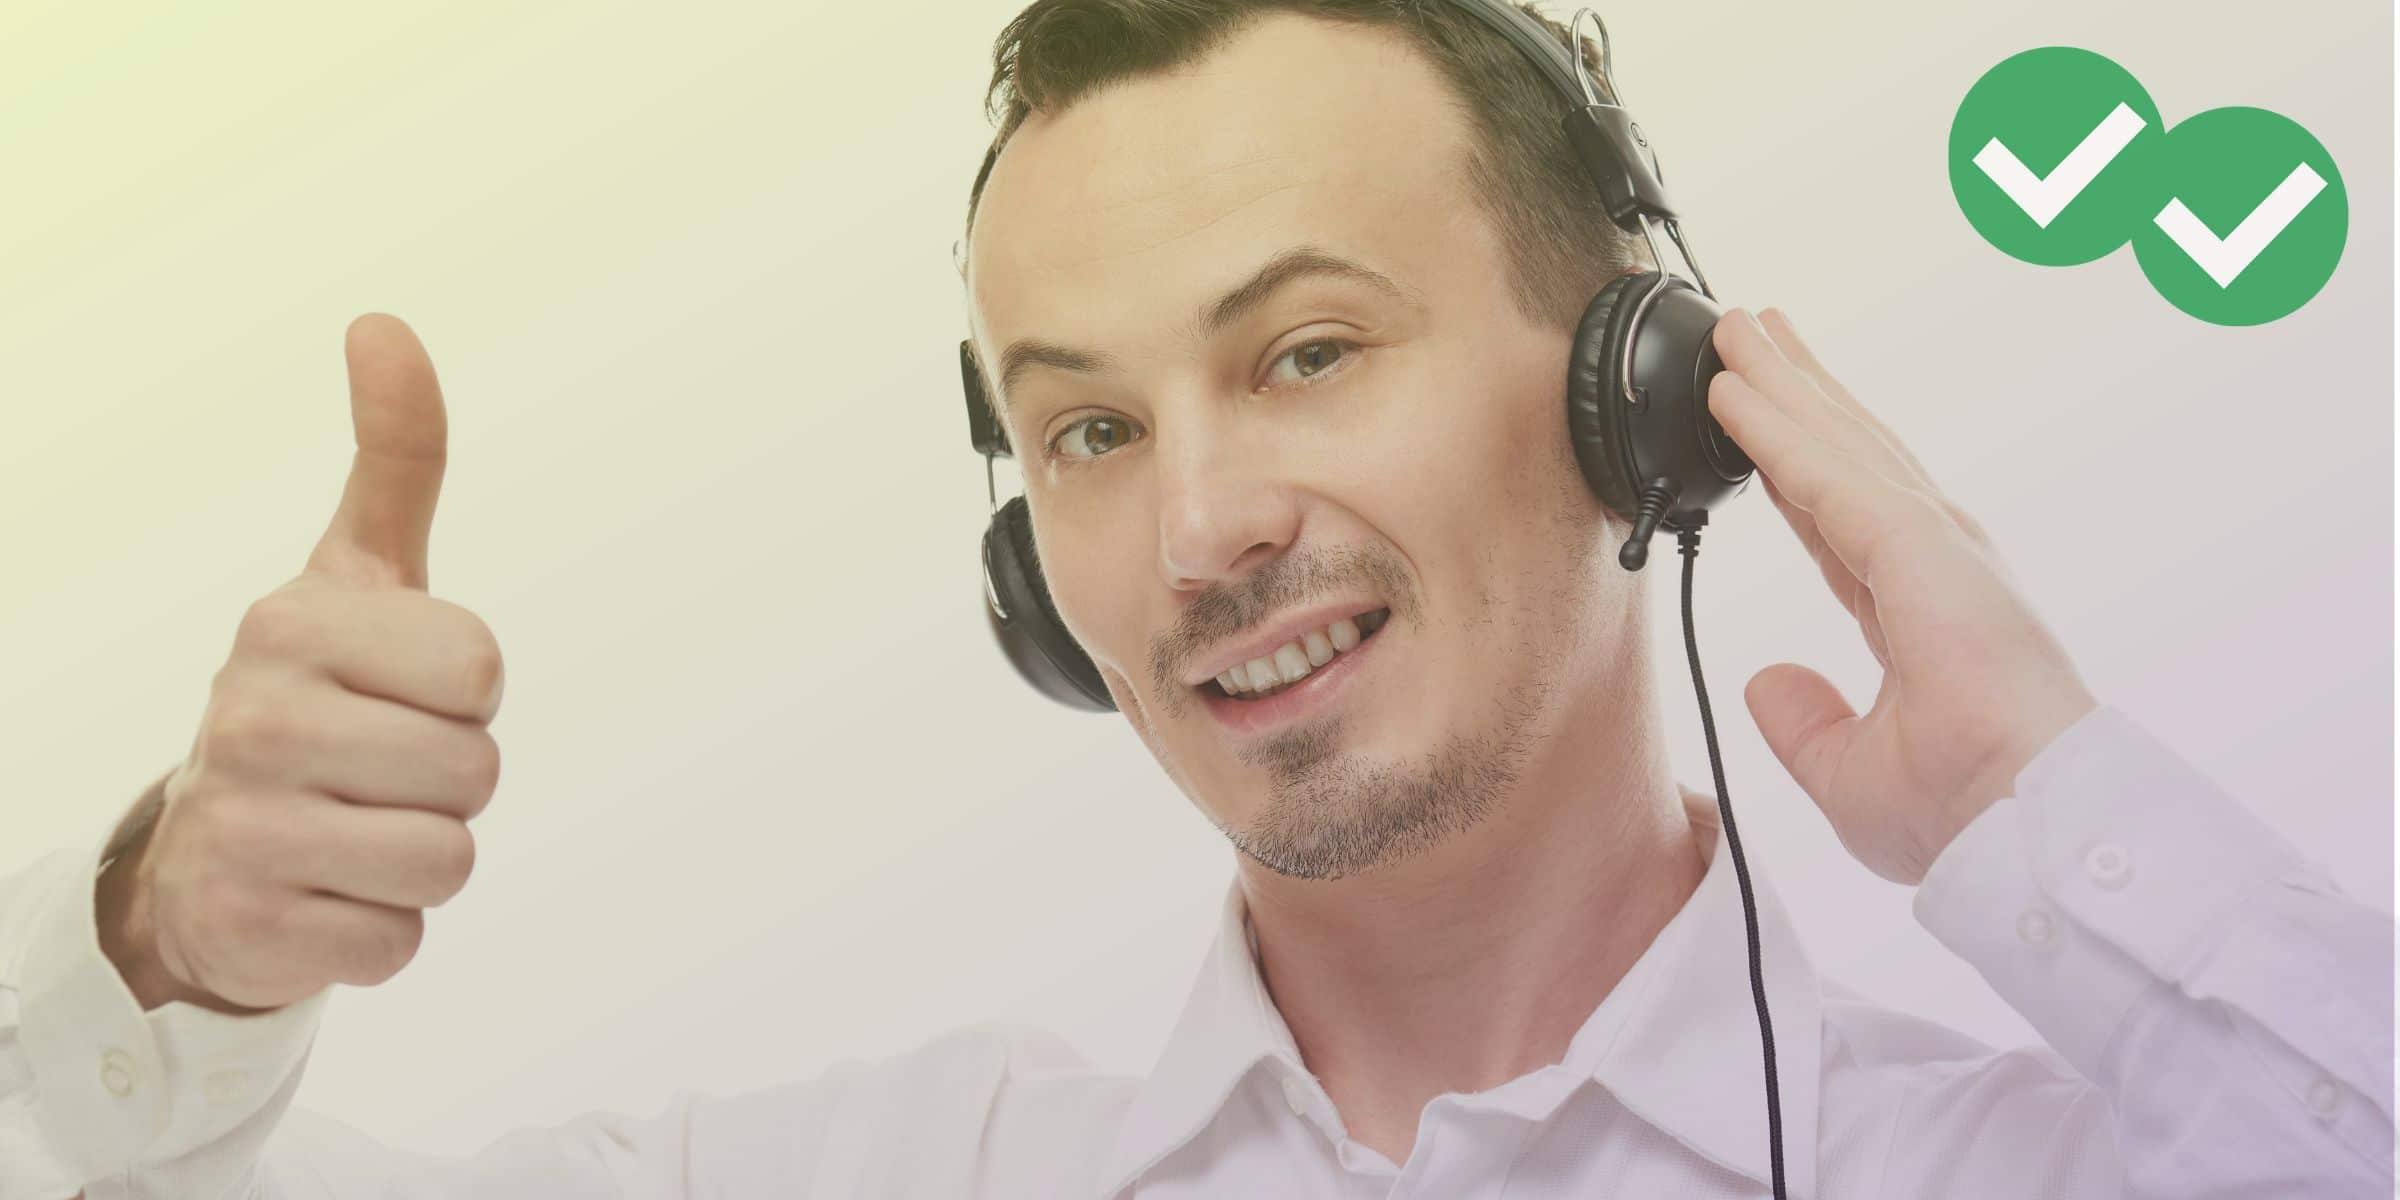 Man wearing headset smiling and holding a thumbs up, representing TOEFL speaking topics - image by Magoosh